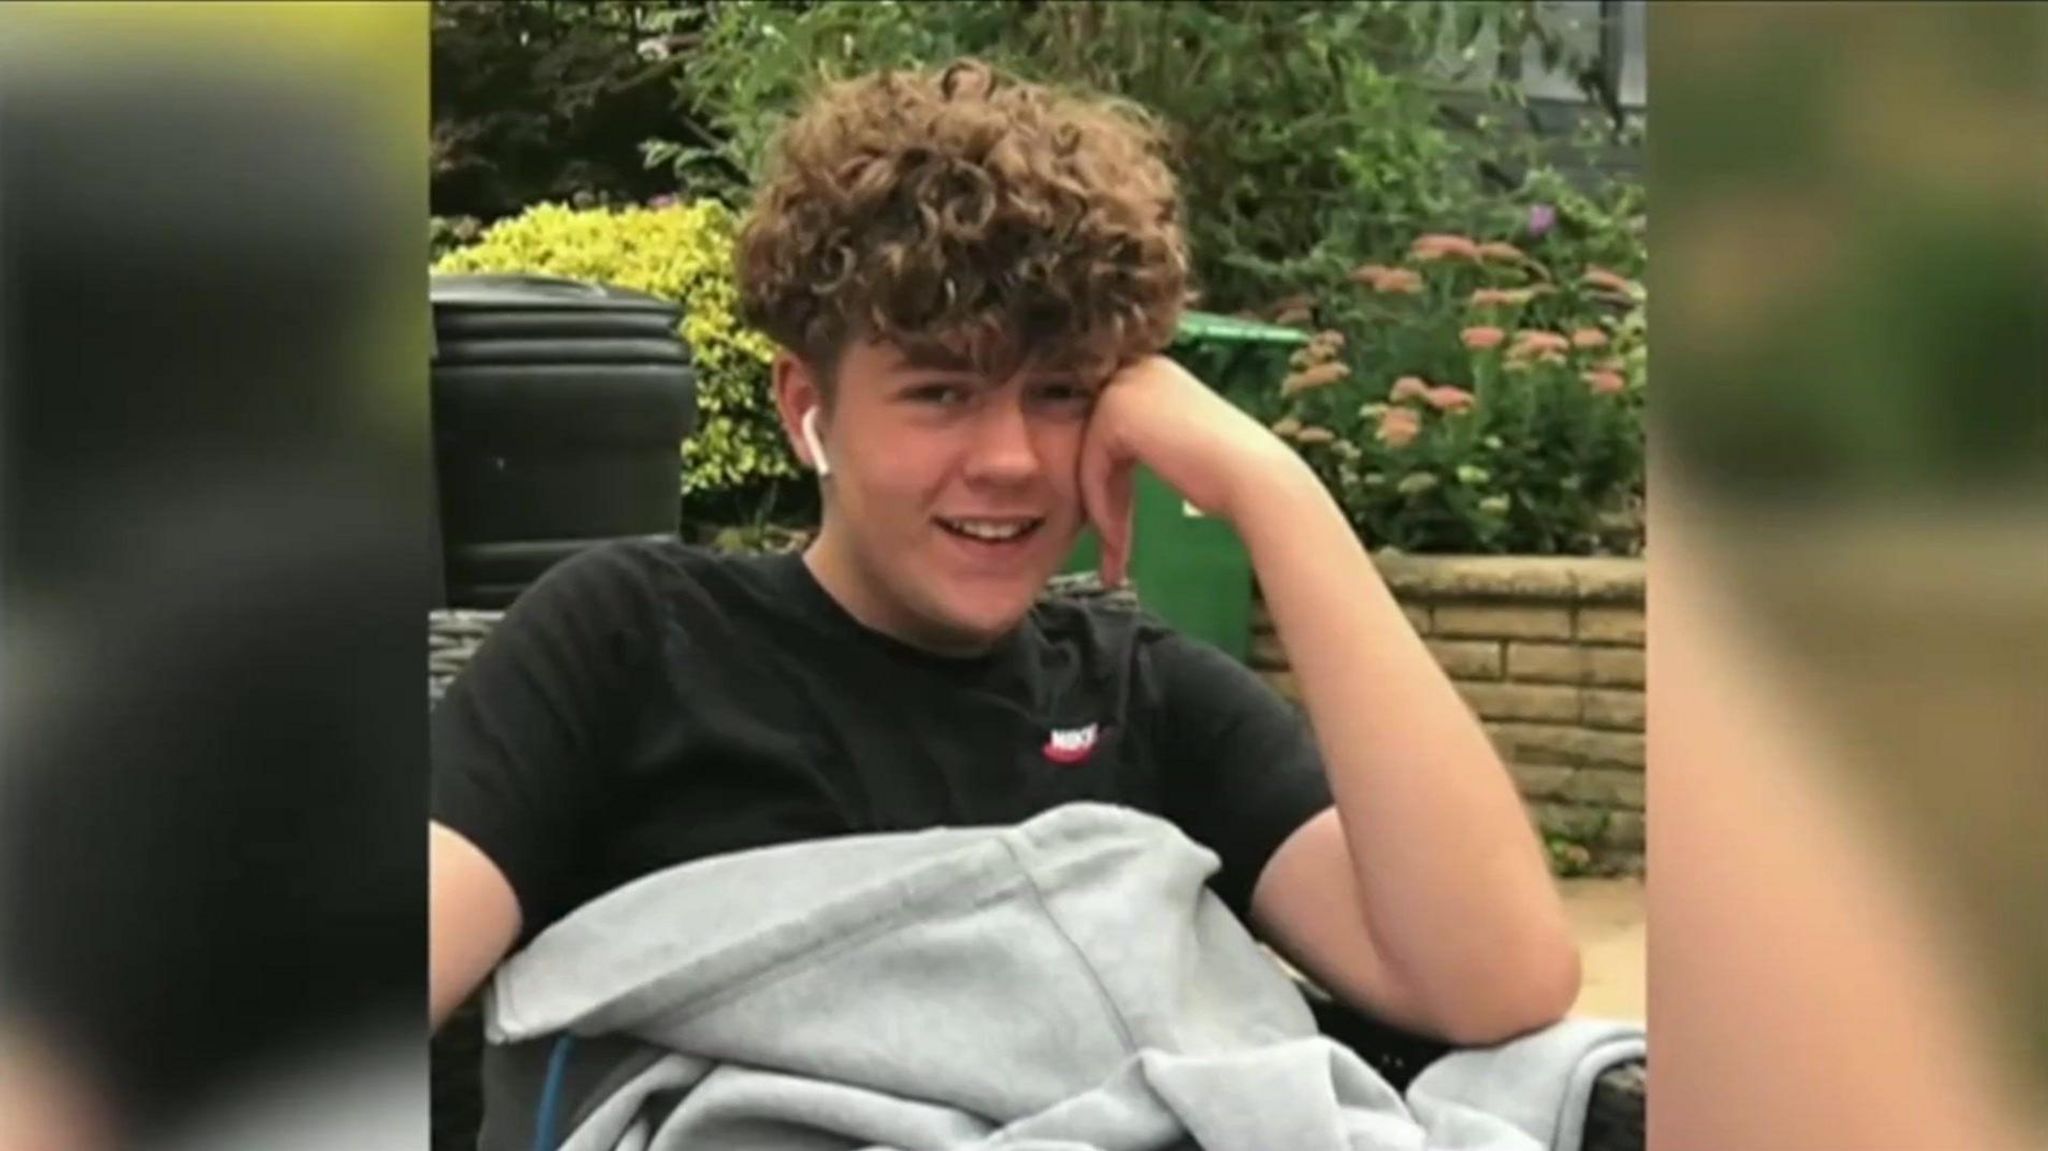 A boy with curly hair wearing a black t-shire, sat down in front of shrubbery